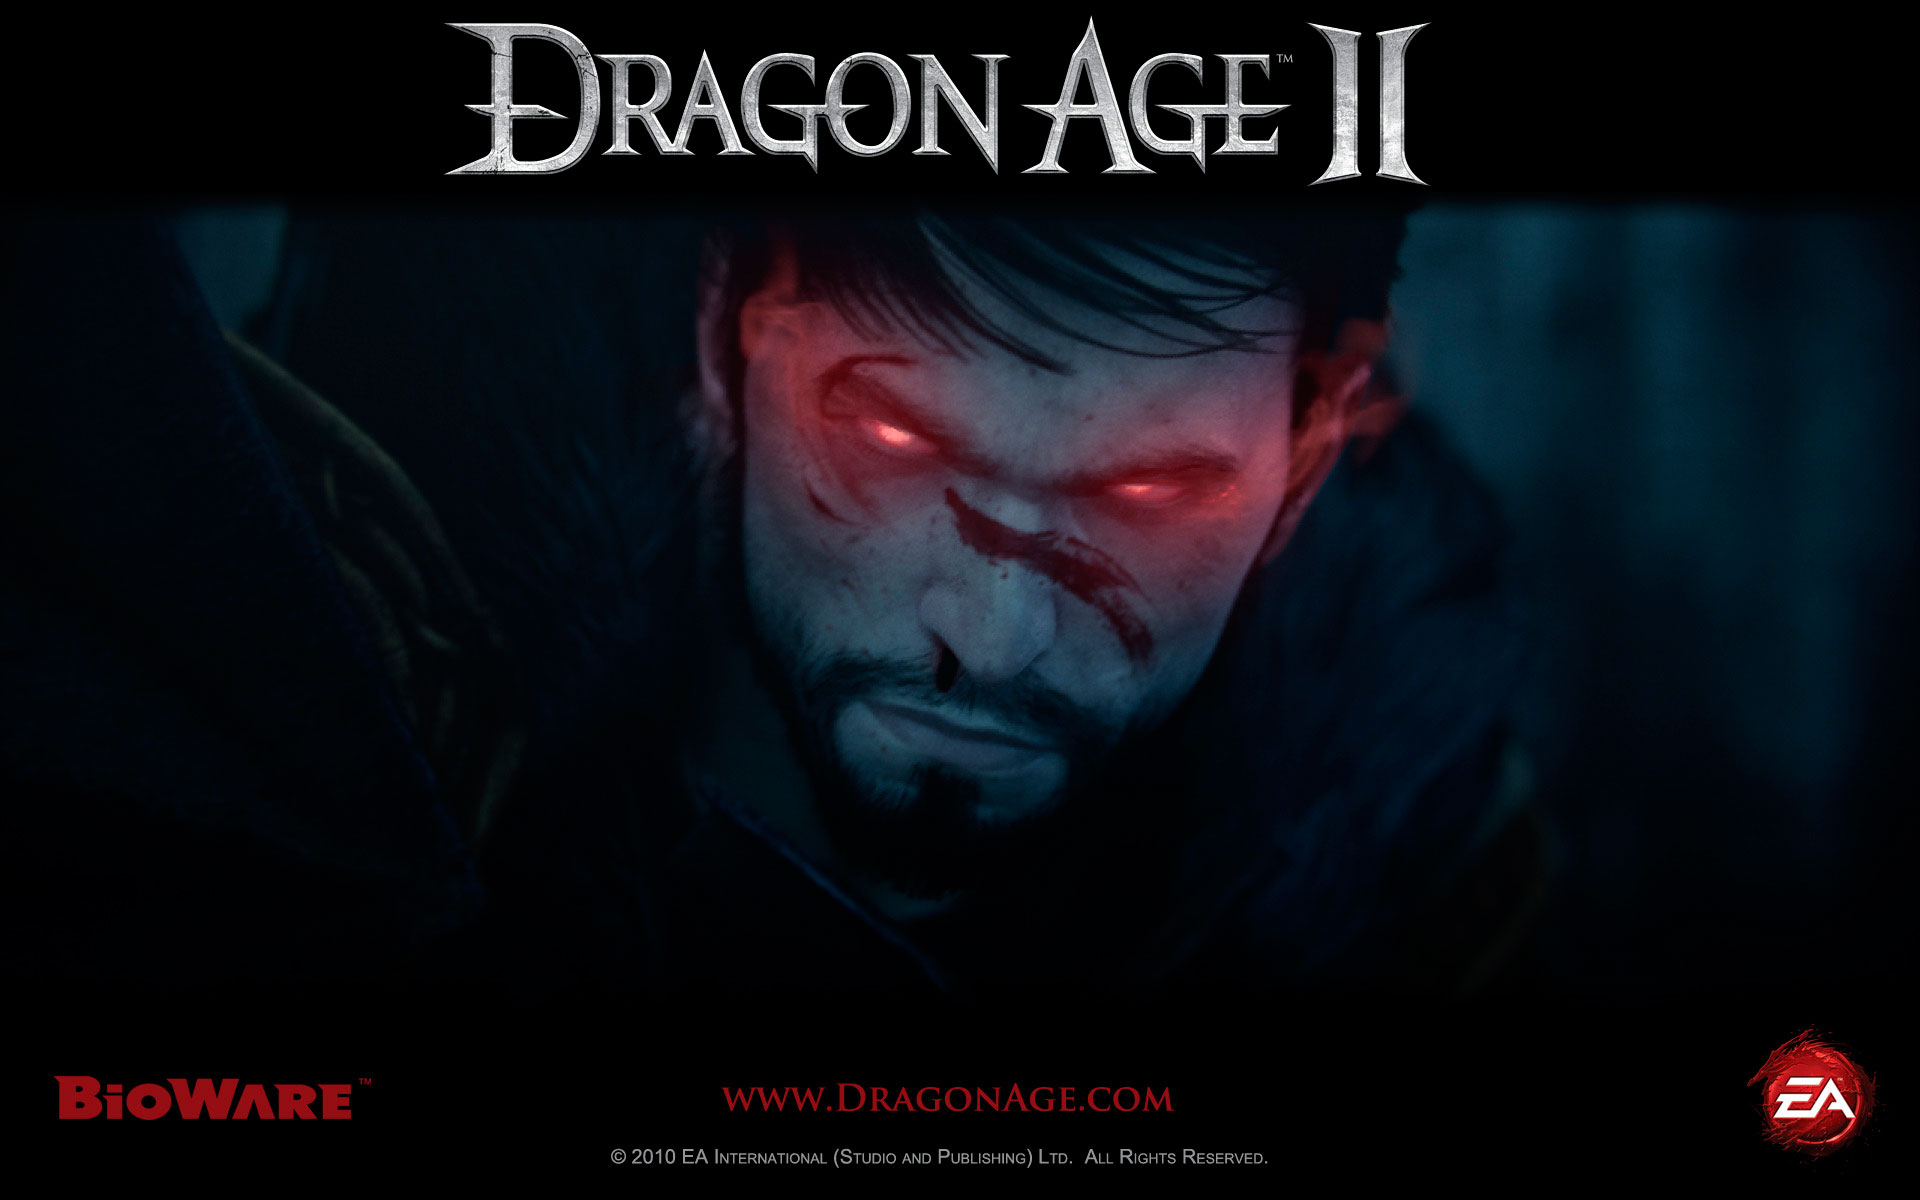 Here are some Dragon Age II HD wallpapers